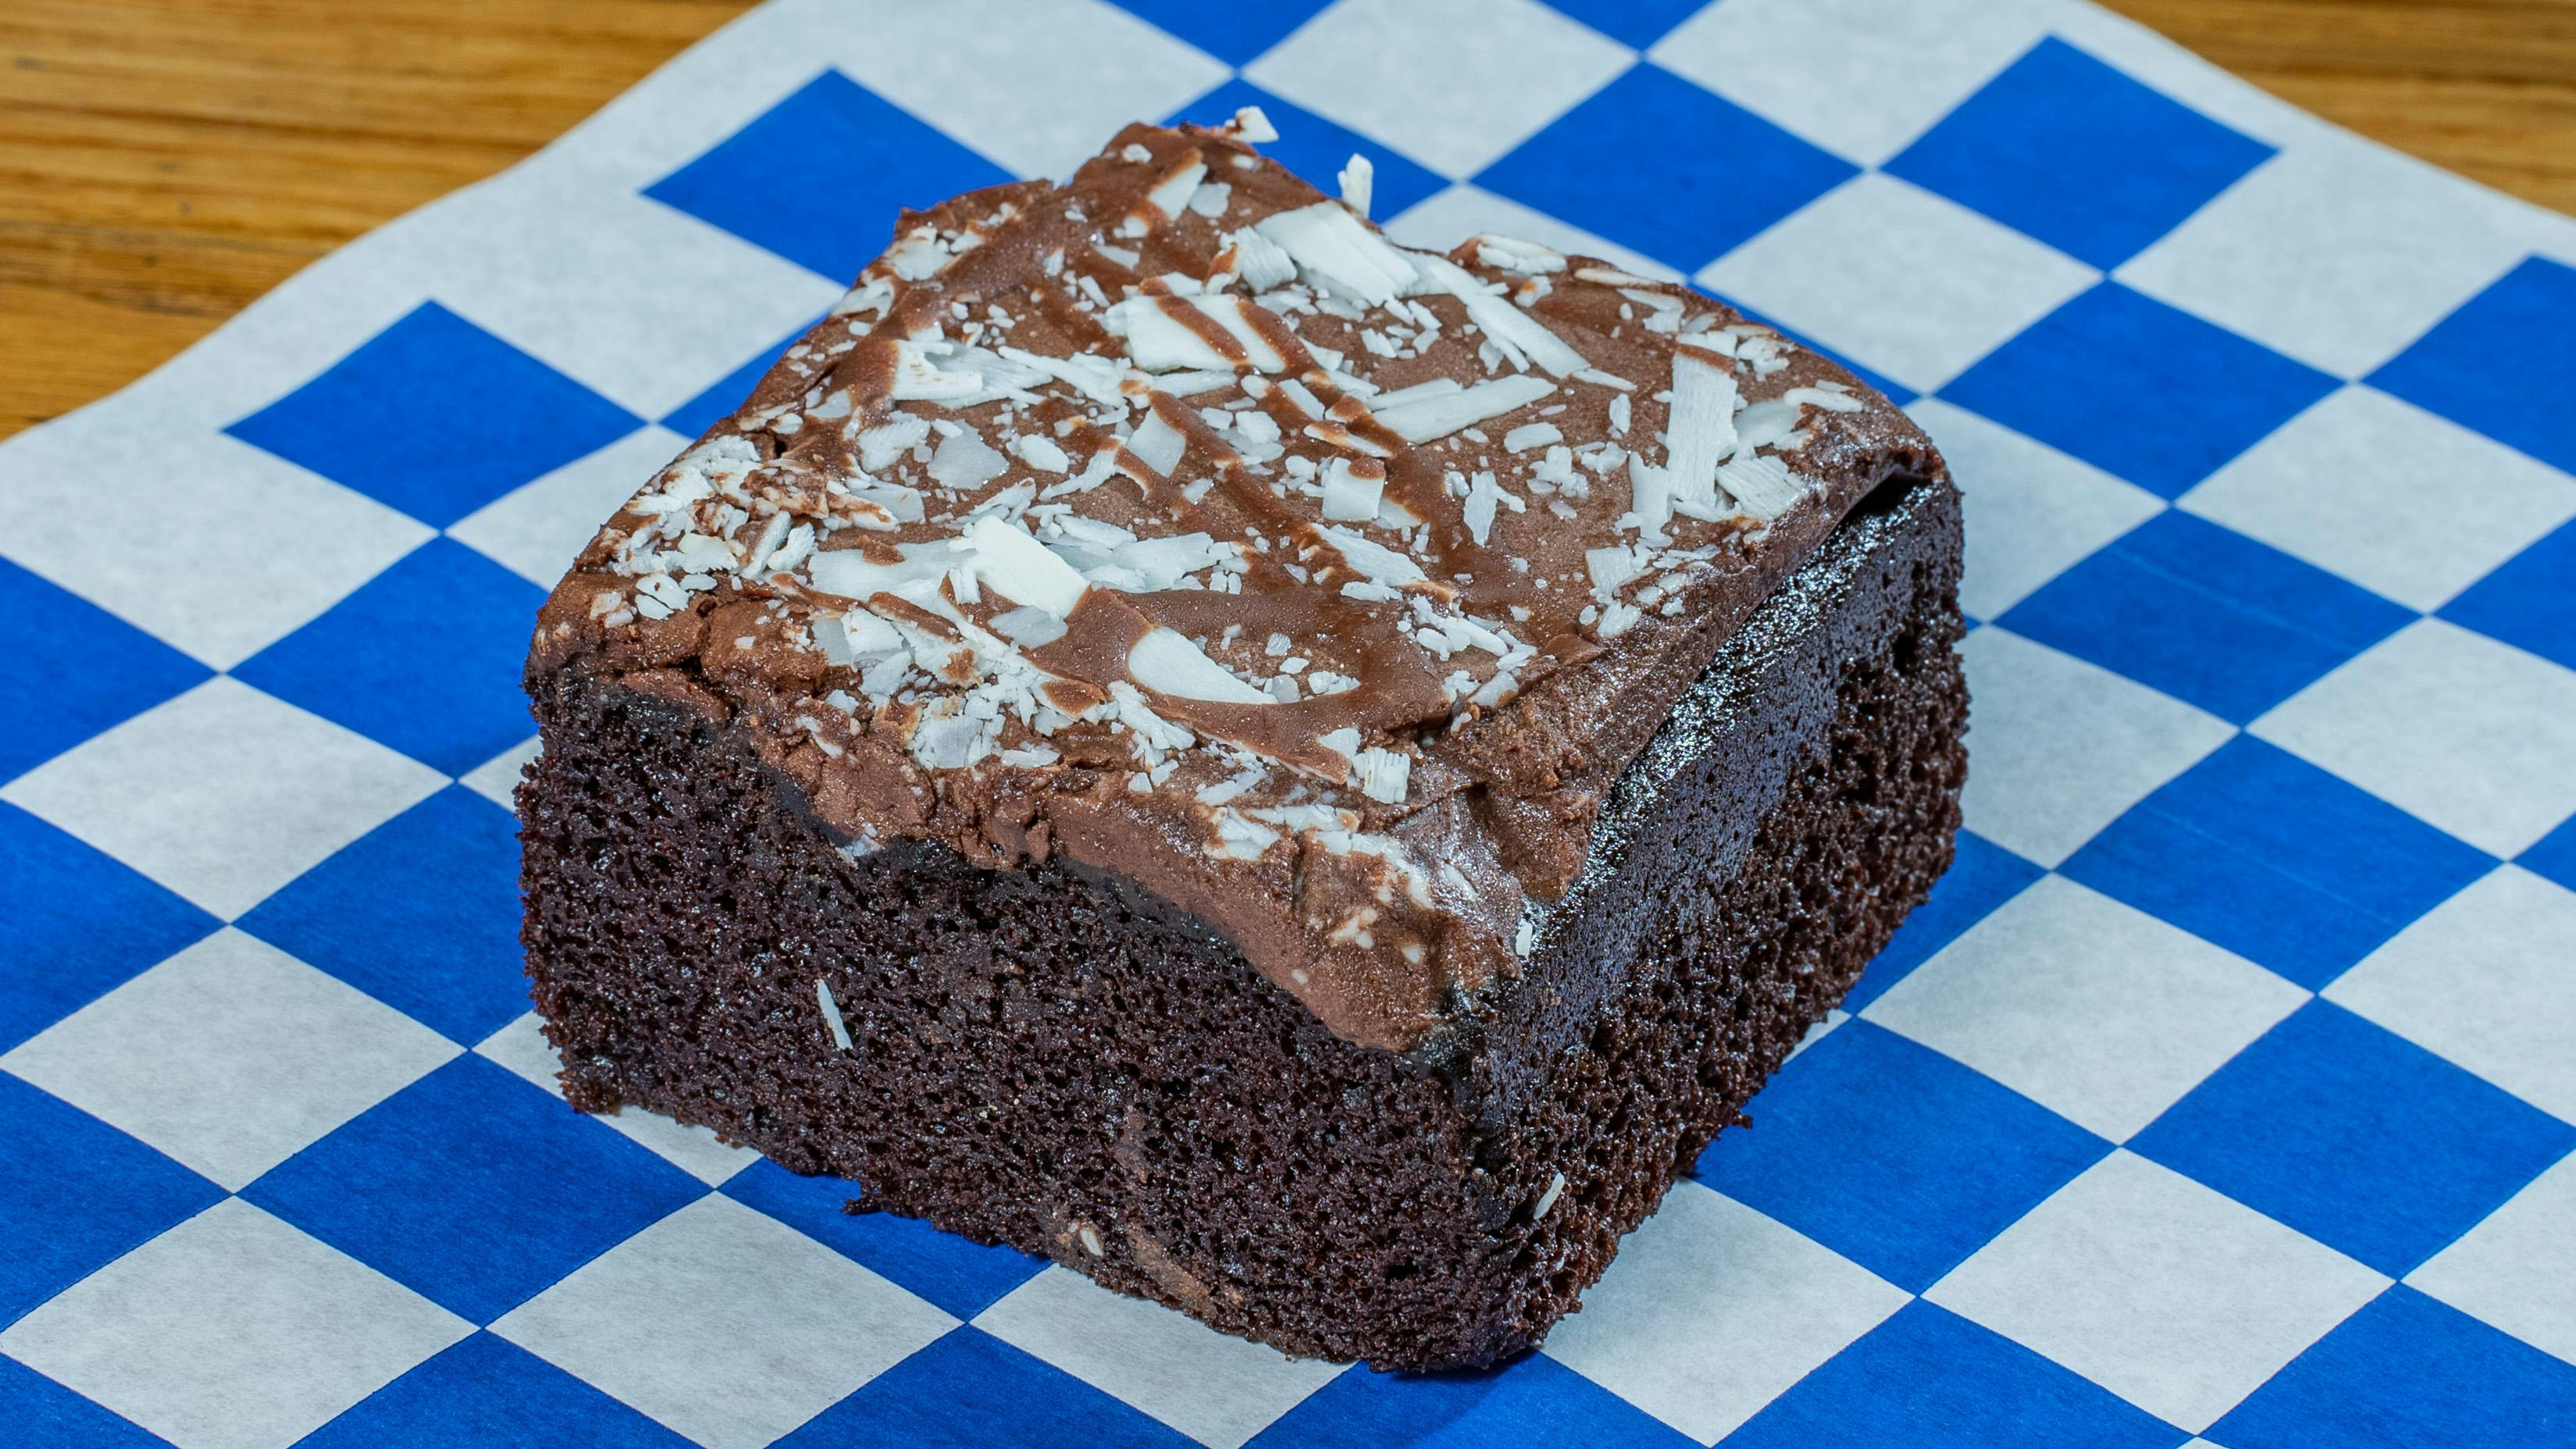 Chocolate Fudge Cake from Austin Salad Company - East 6th St in Austin, TX